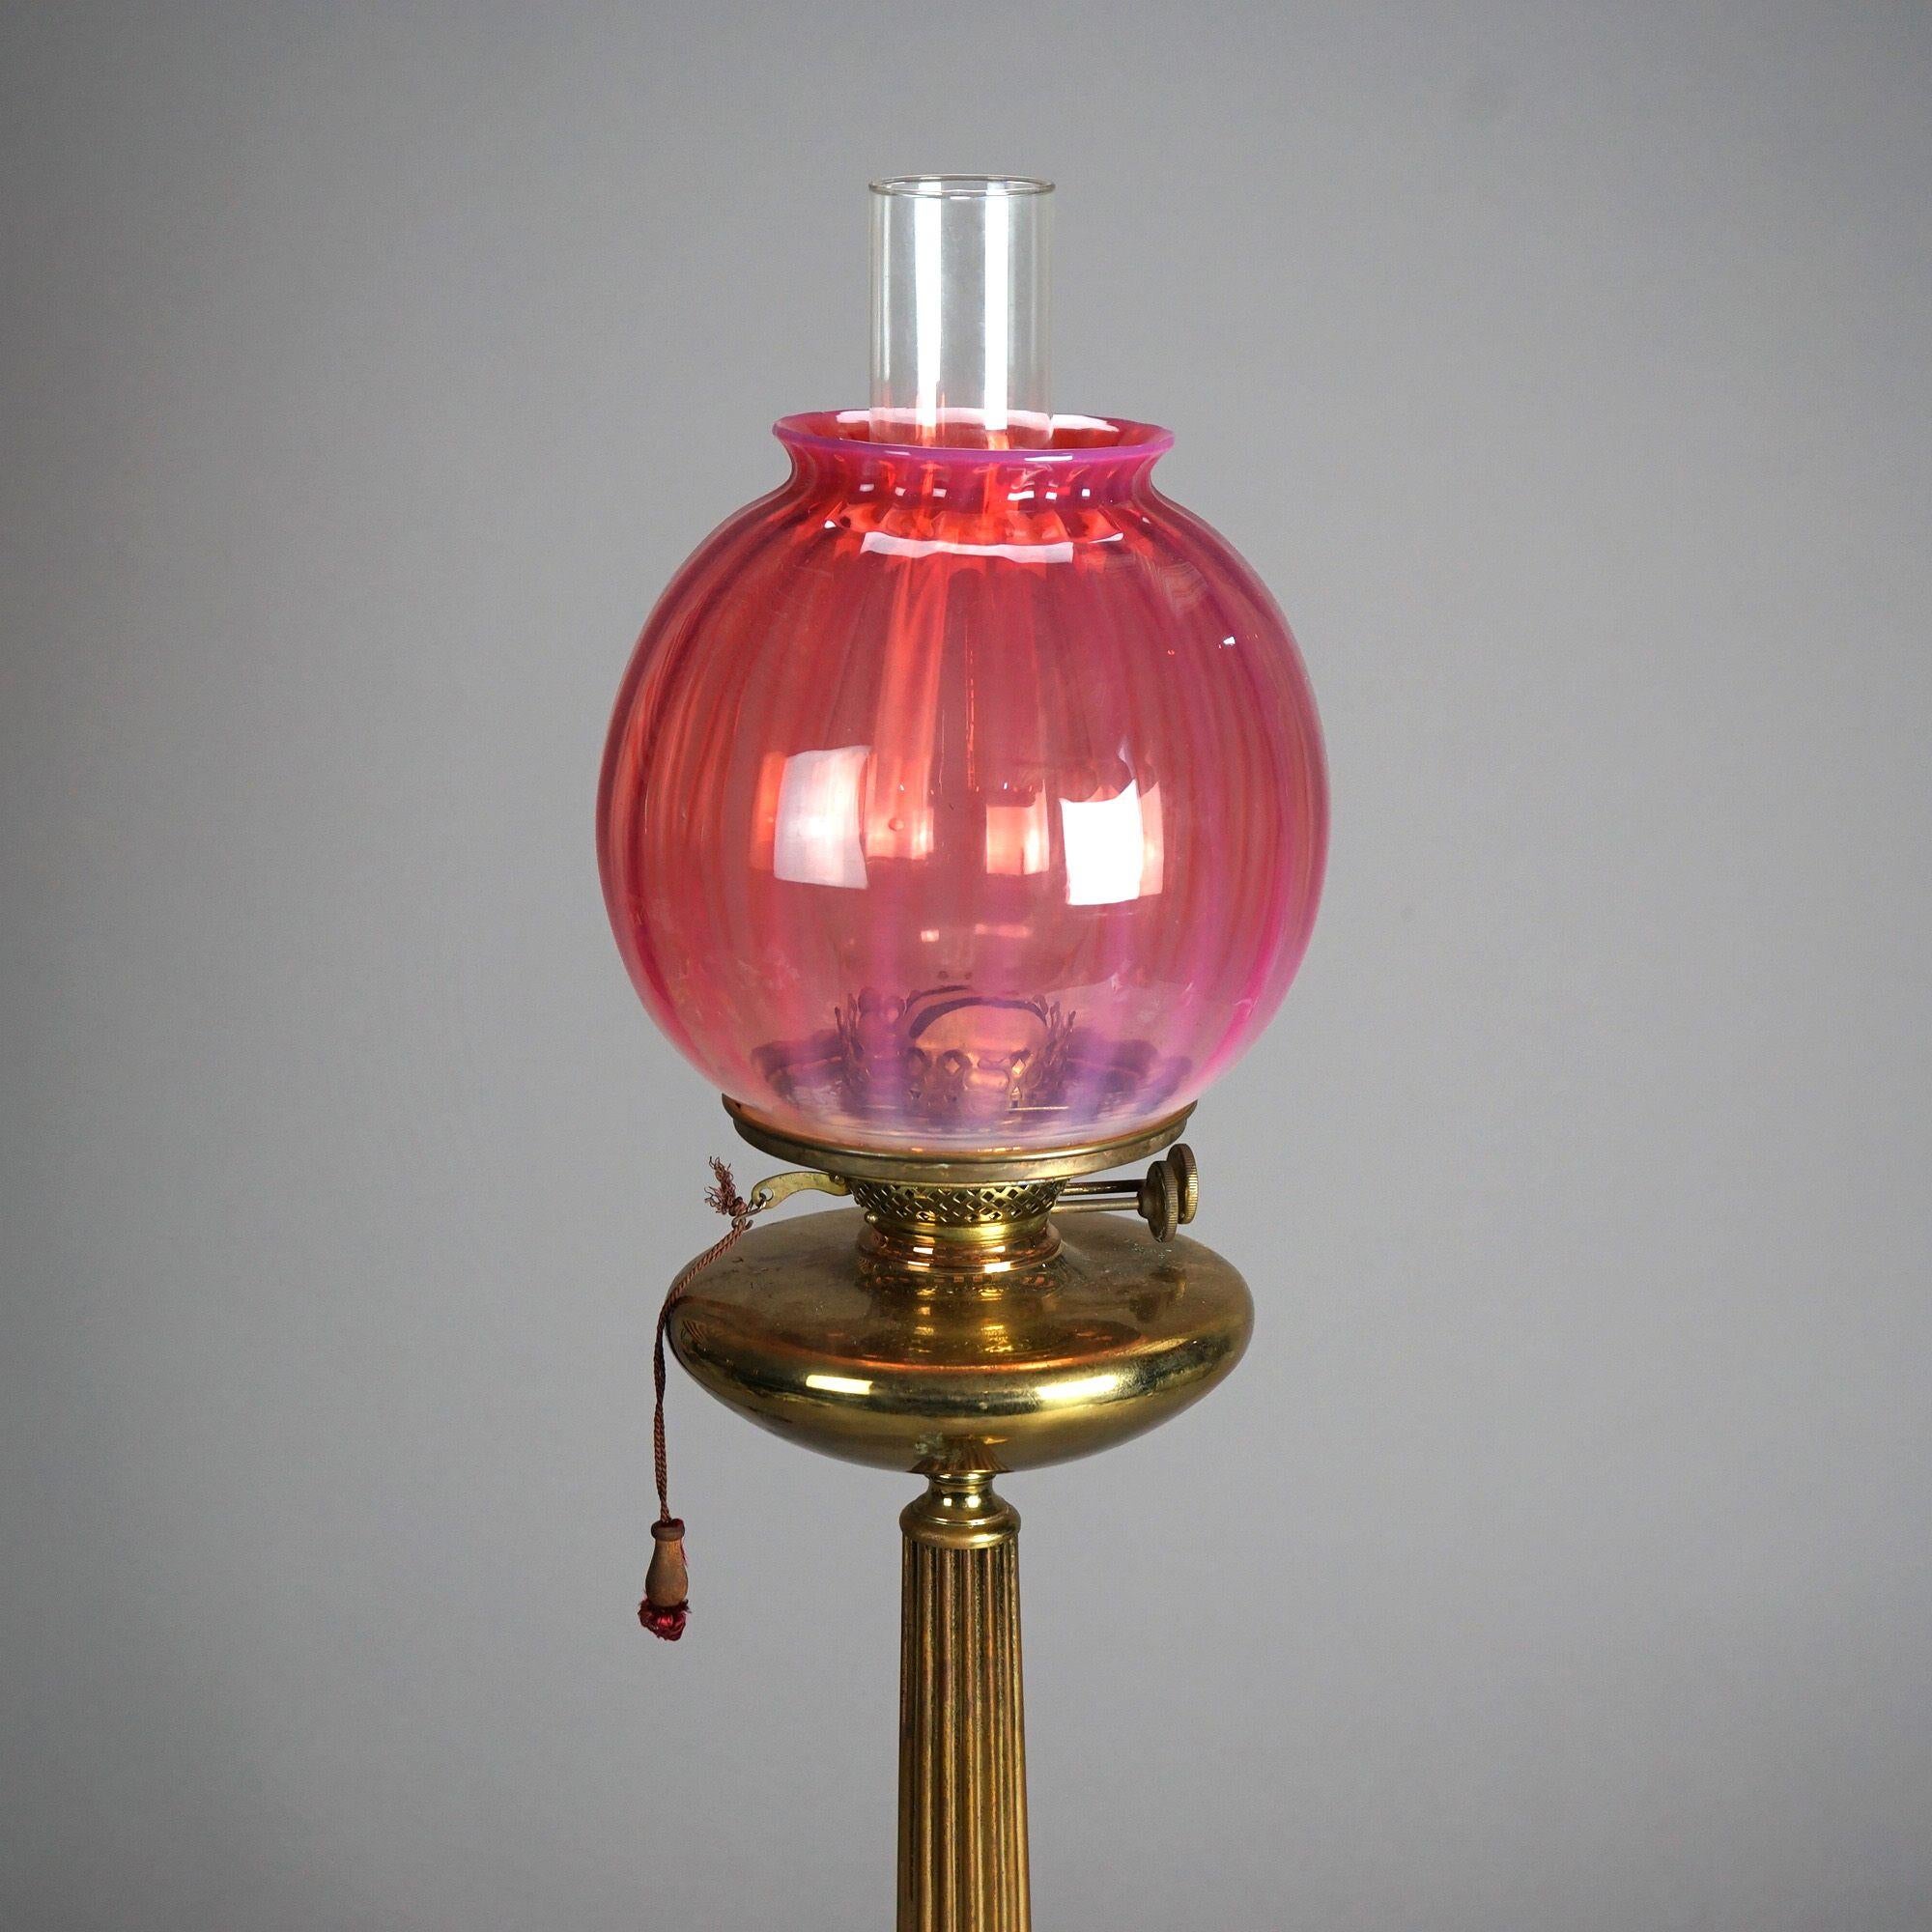 An antique Classical parlor lamp offers cranberry ribbed glass globe shade over cast brass base having fluted column and ball feet, c1880

Measures - 30.5